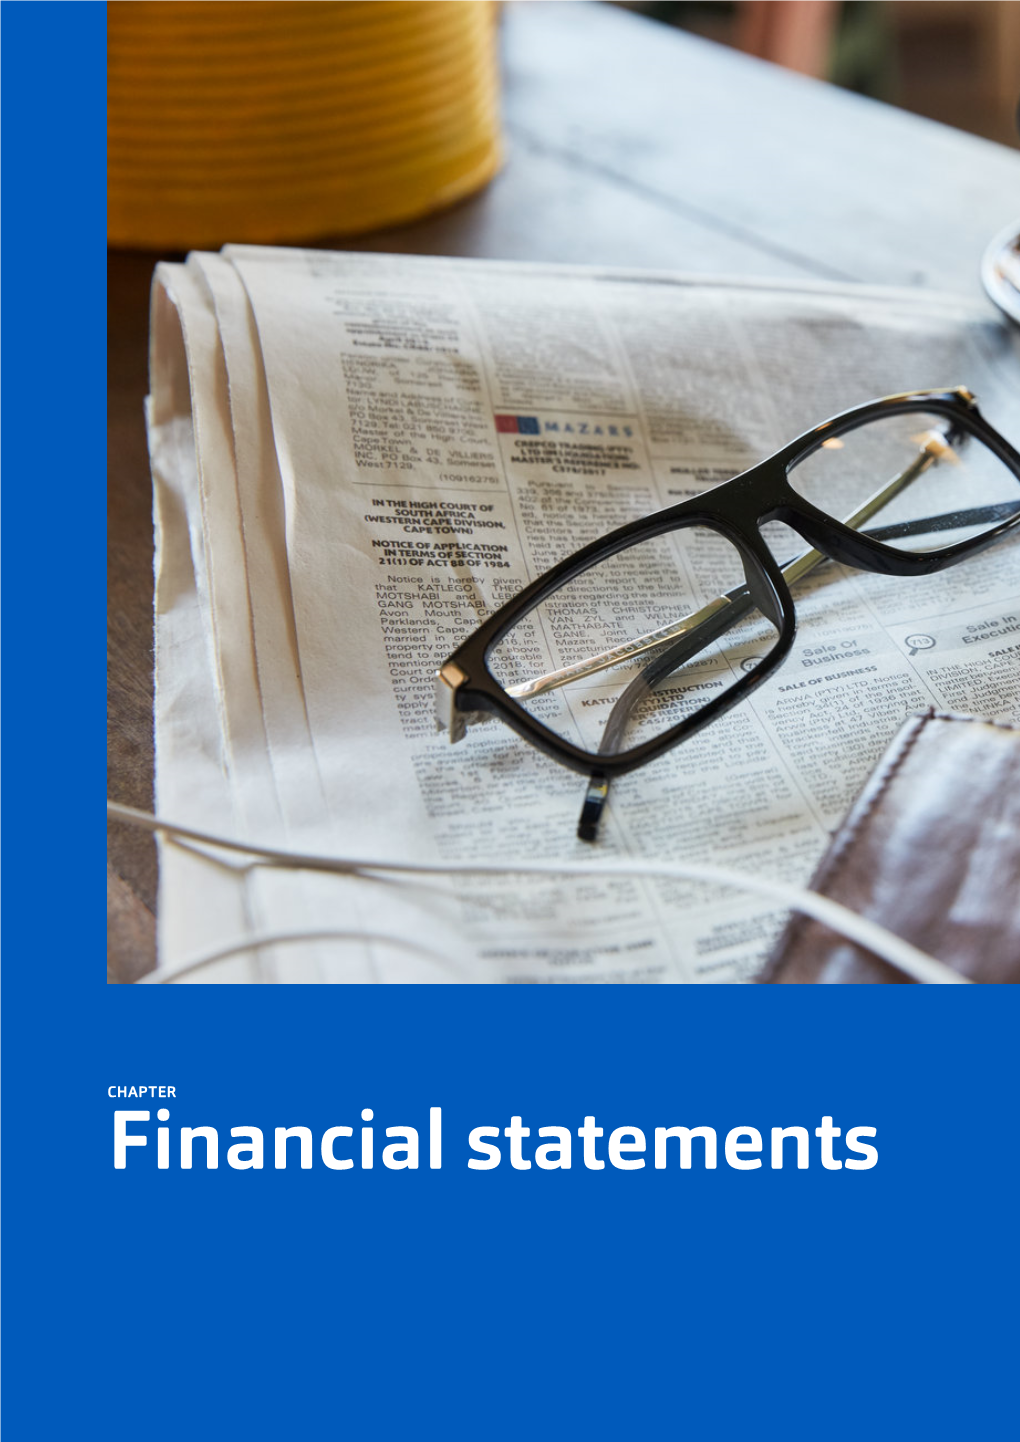 Download the Financial Statements